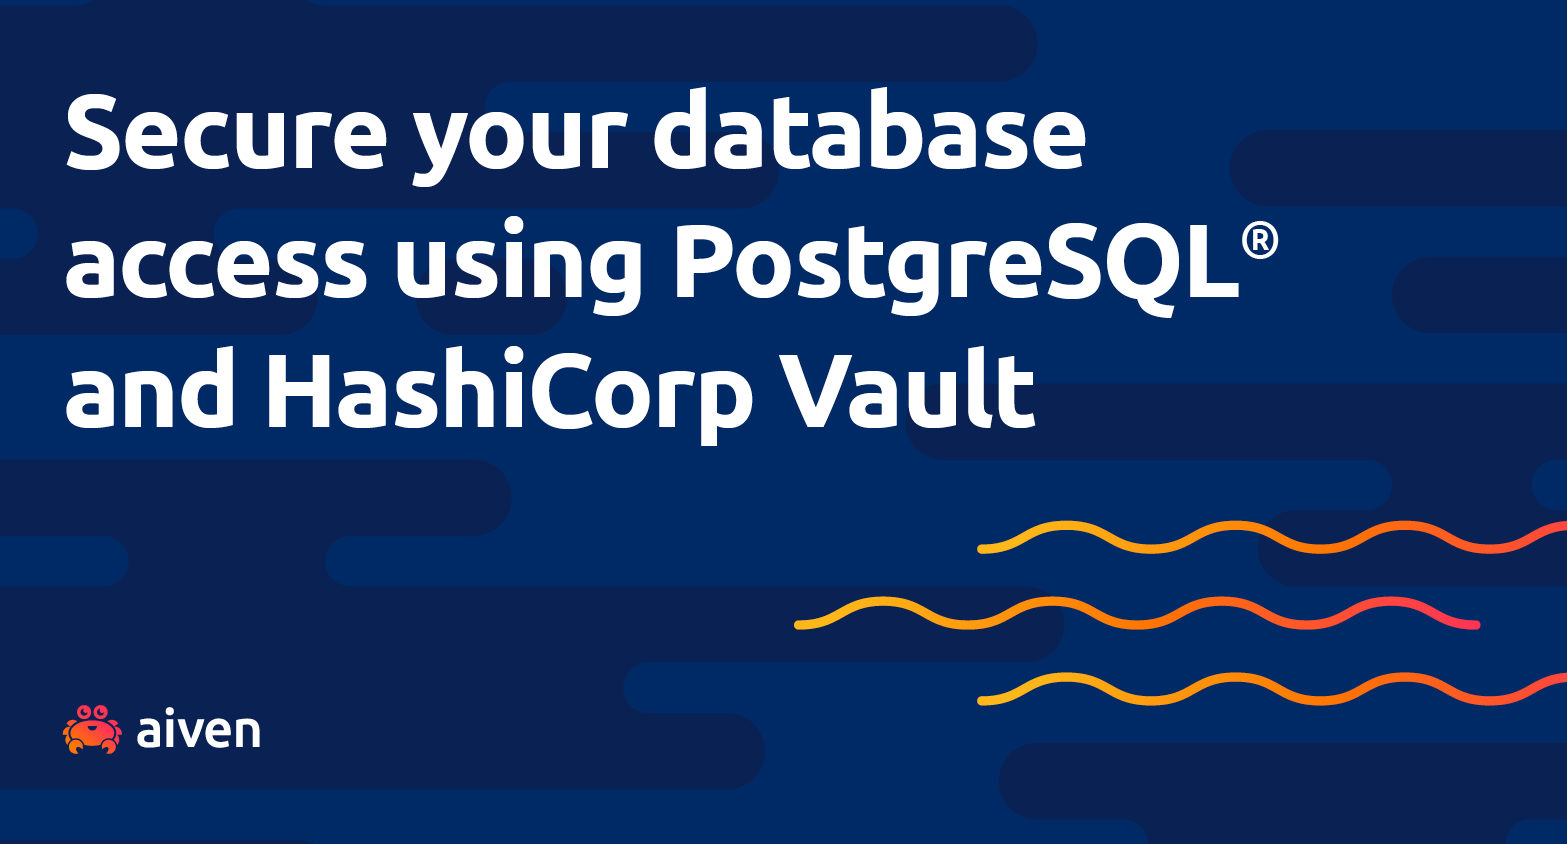 Secure your database access with HashiCorp Vault illustration